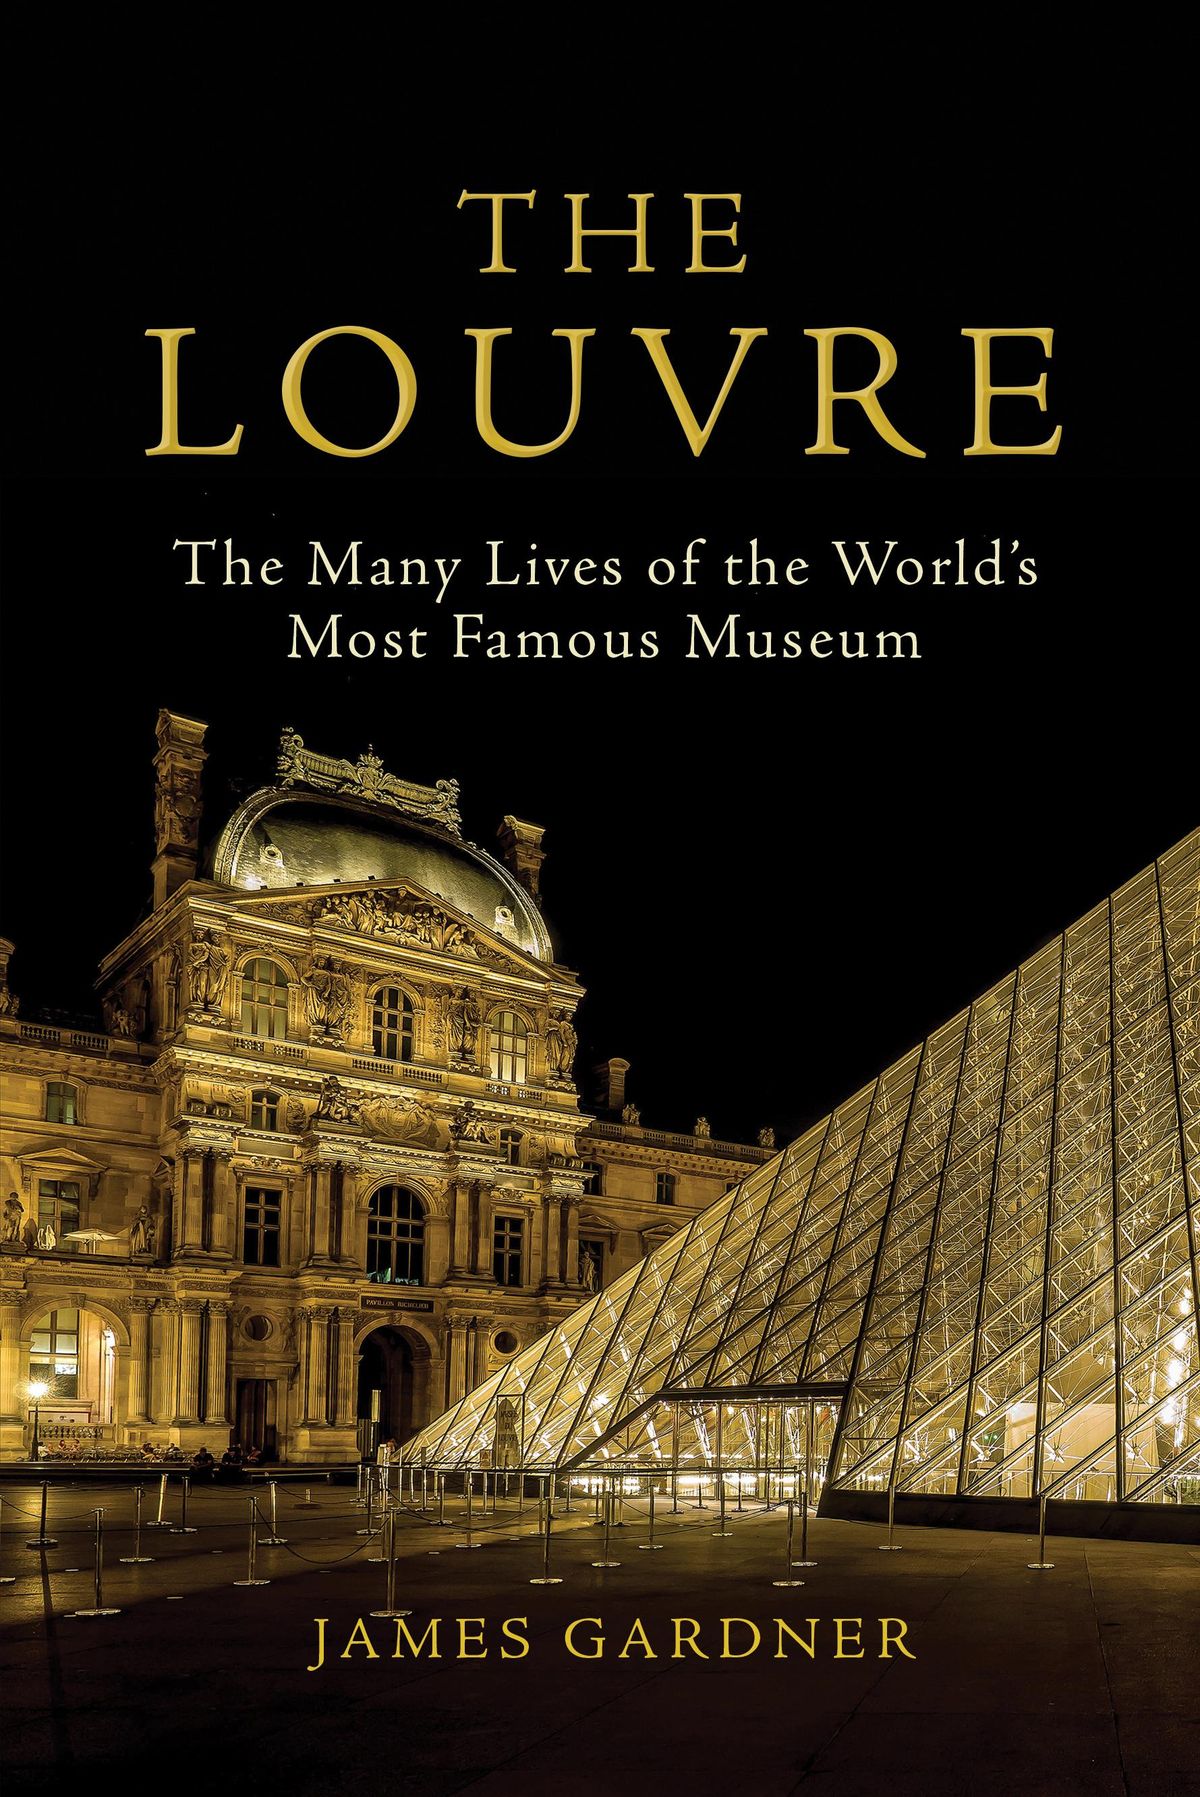 The Louvre (Atlantic Monthly)